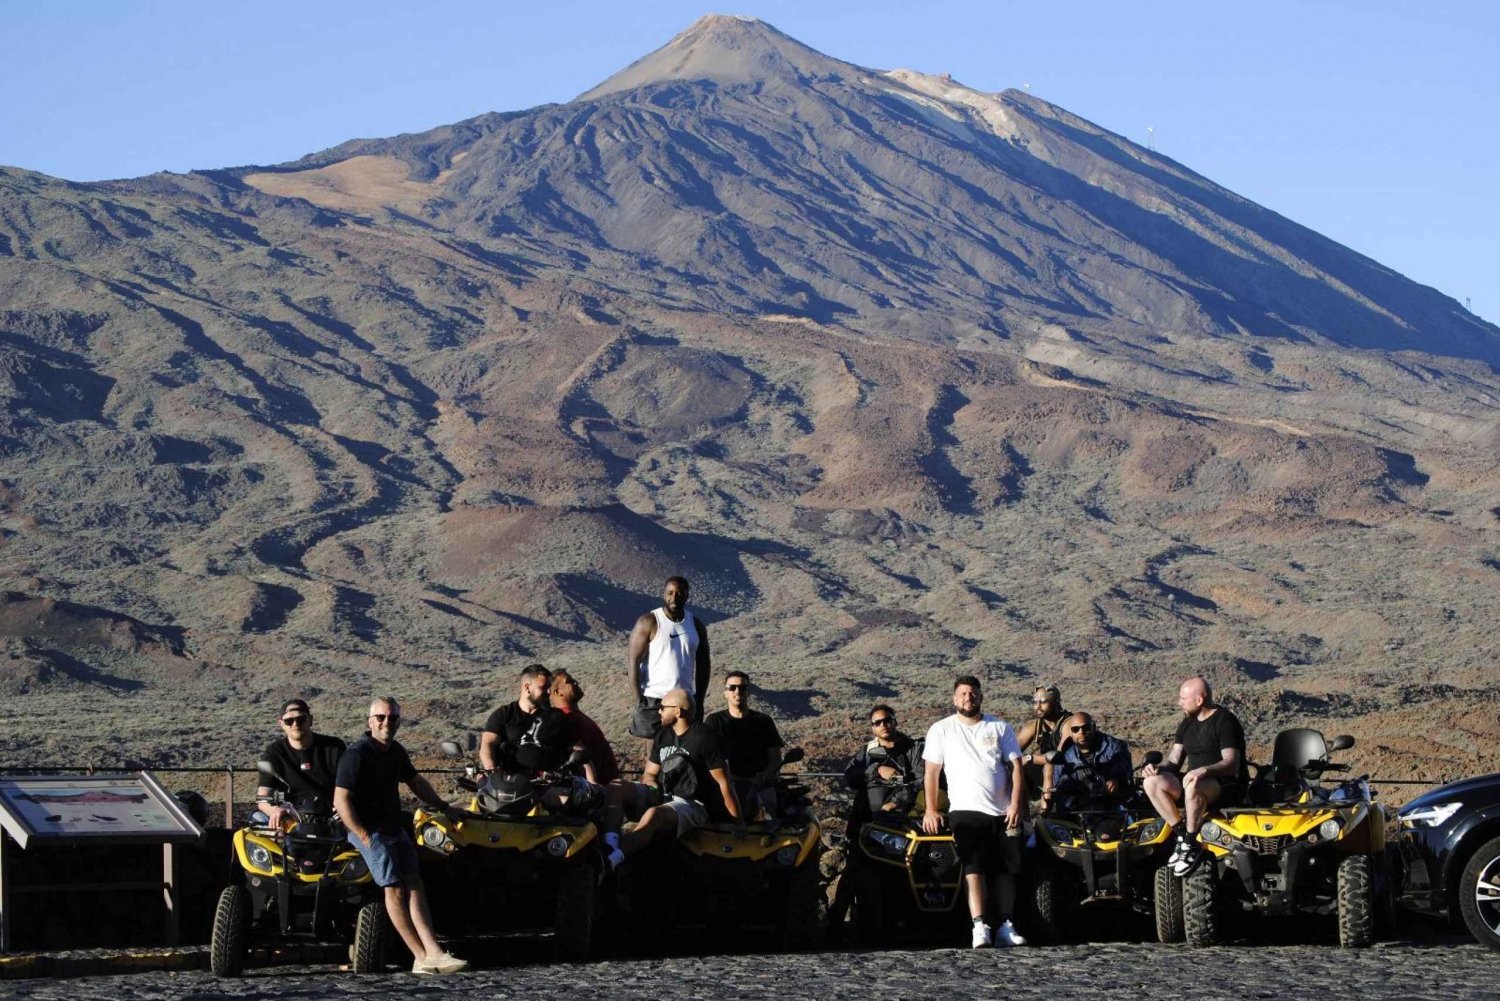 Tenerife: Guided Off-Road Quad Tour on Mount Teide